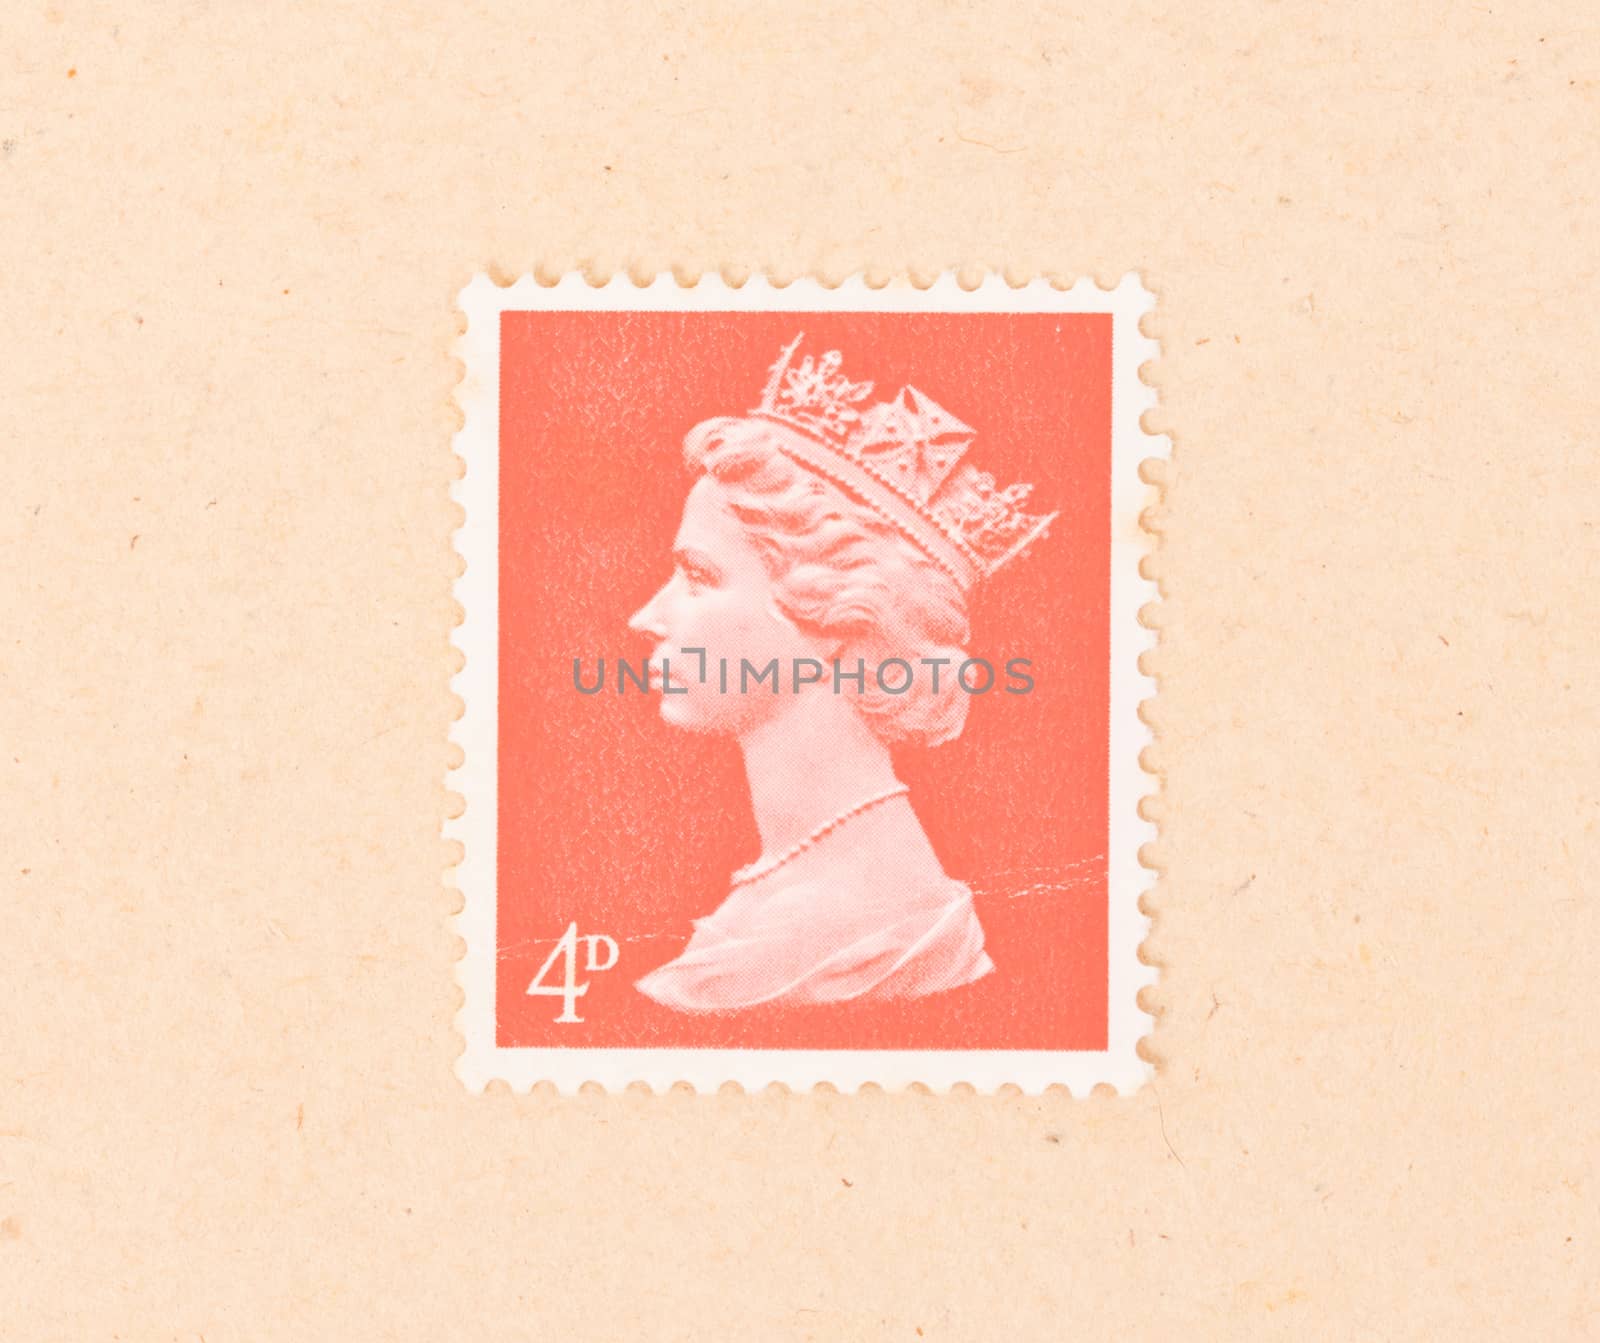 UNITED KINGDOM - CIRCA 1960: A stamp printed in the United Kingd by michaklootwijk